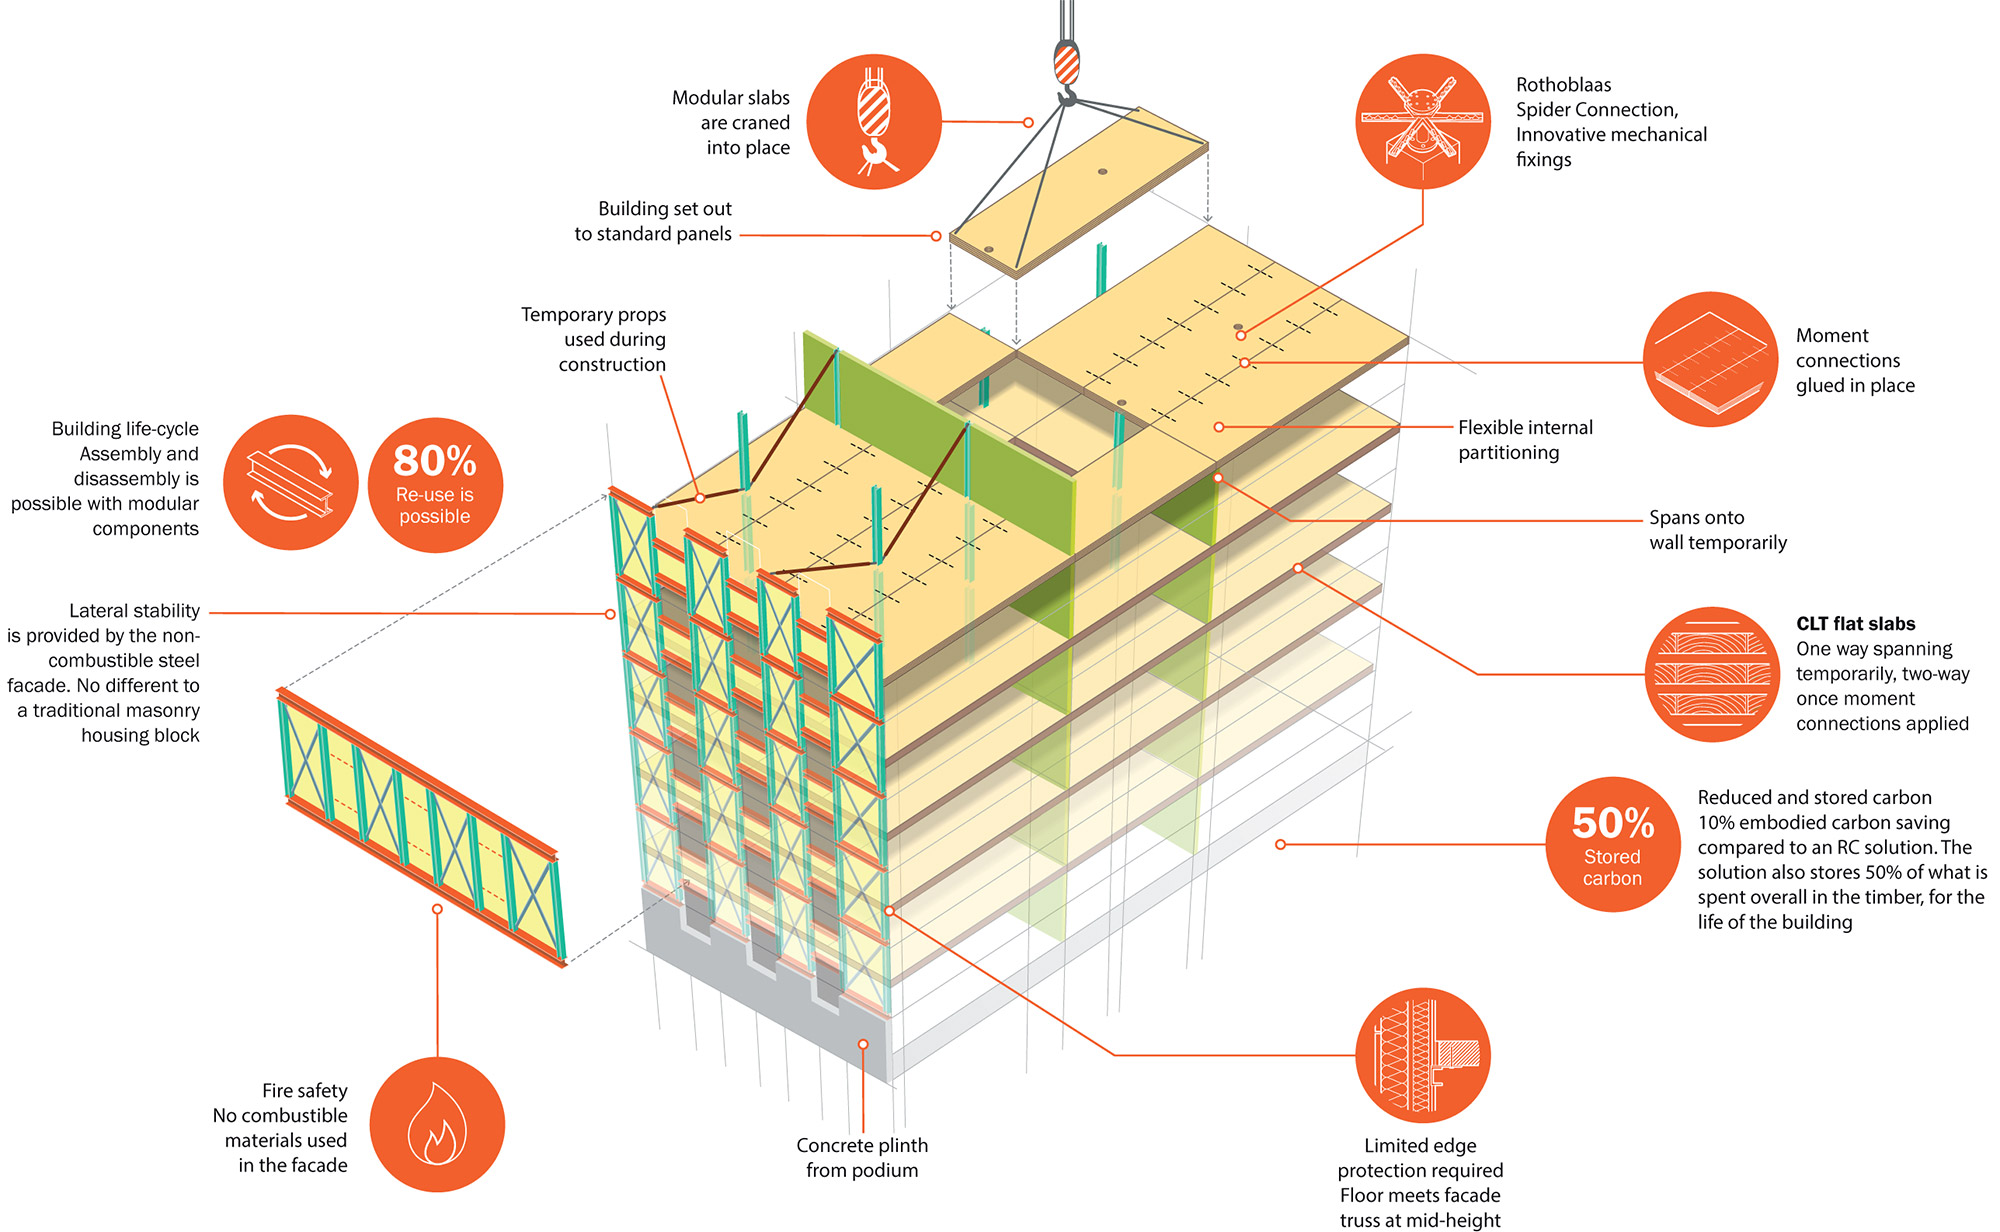 Tall timber infographic by Paul Weston